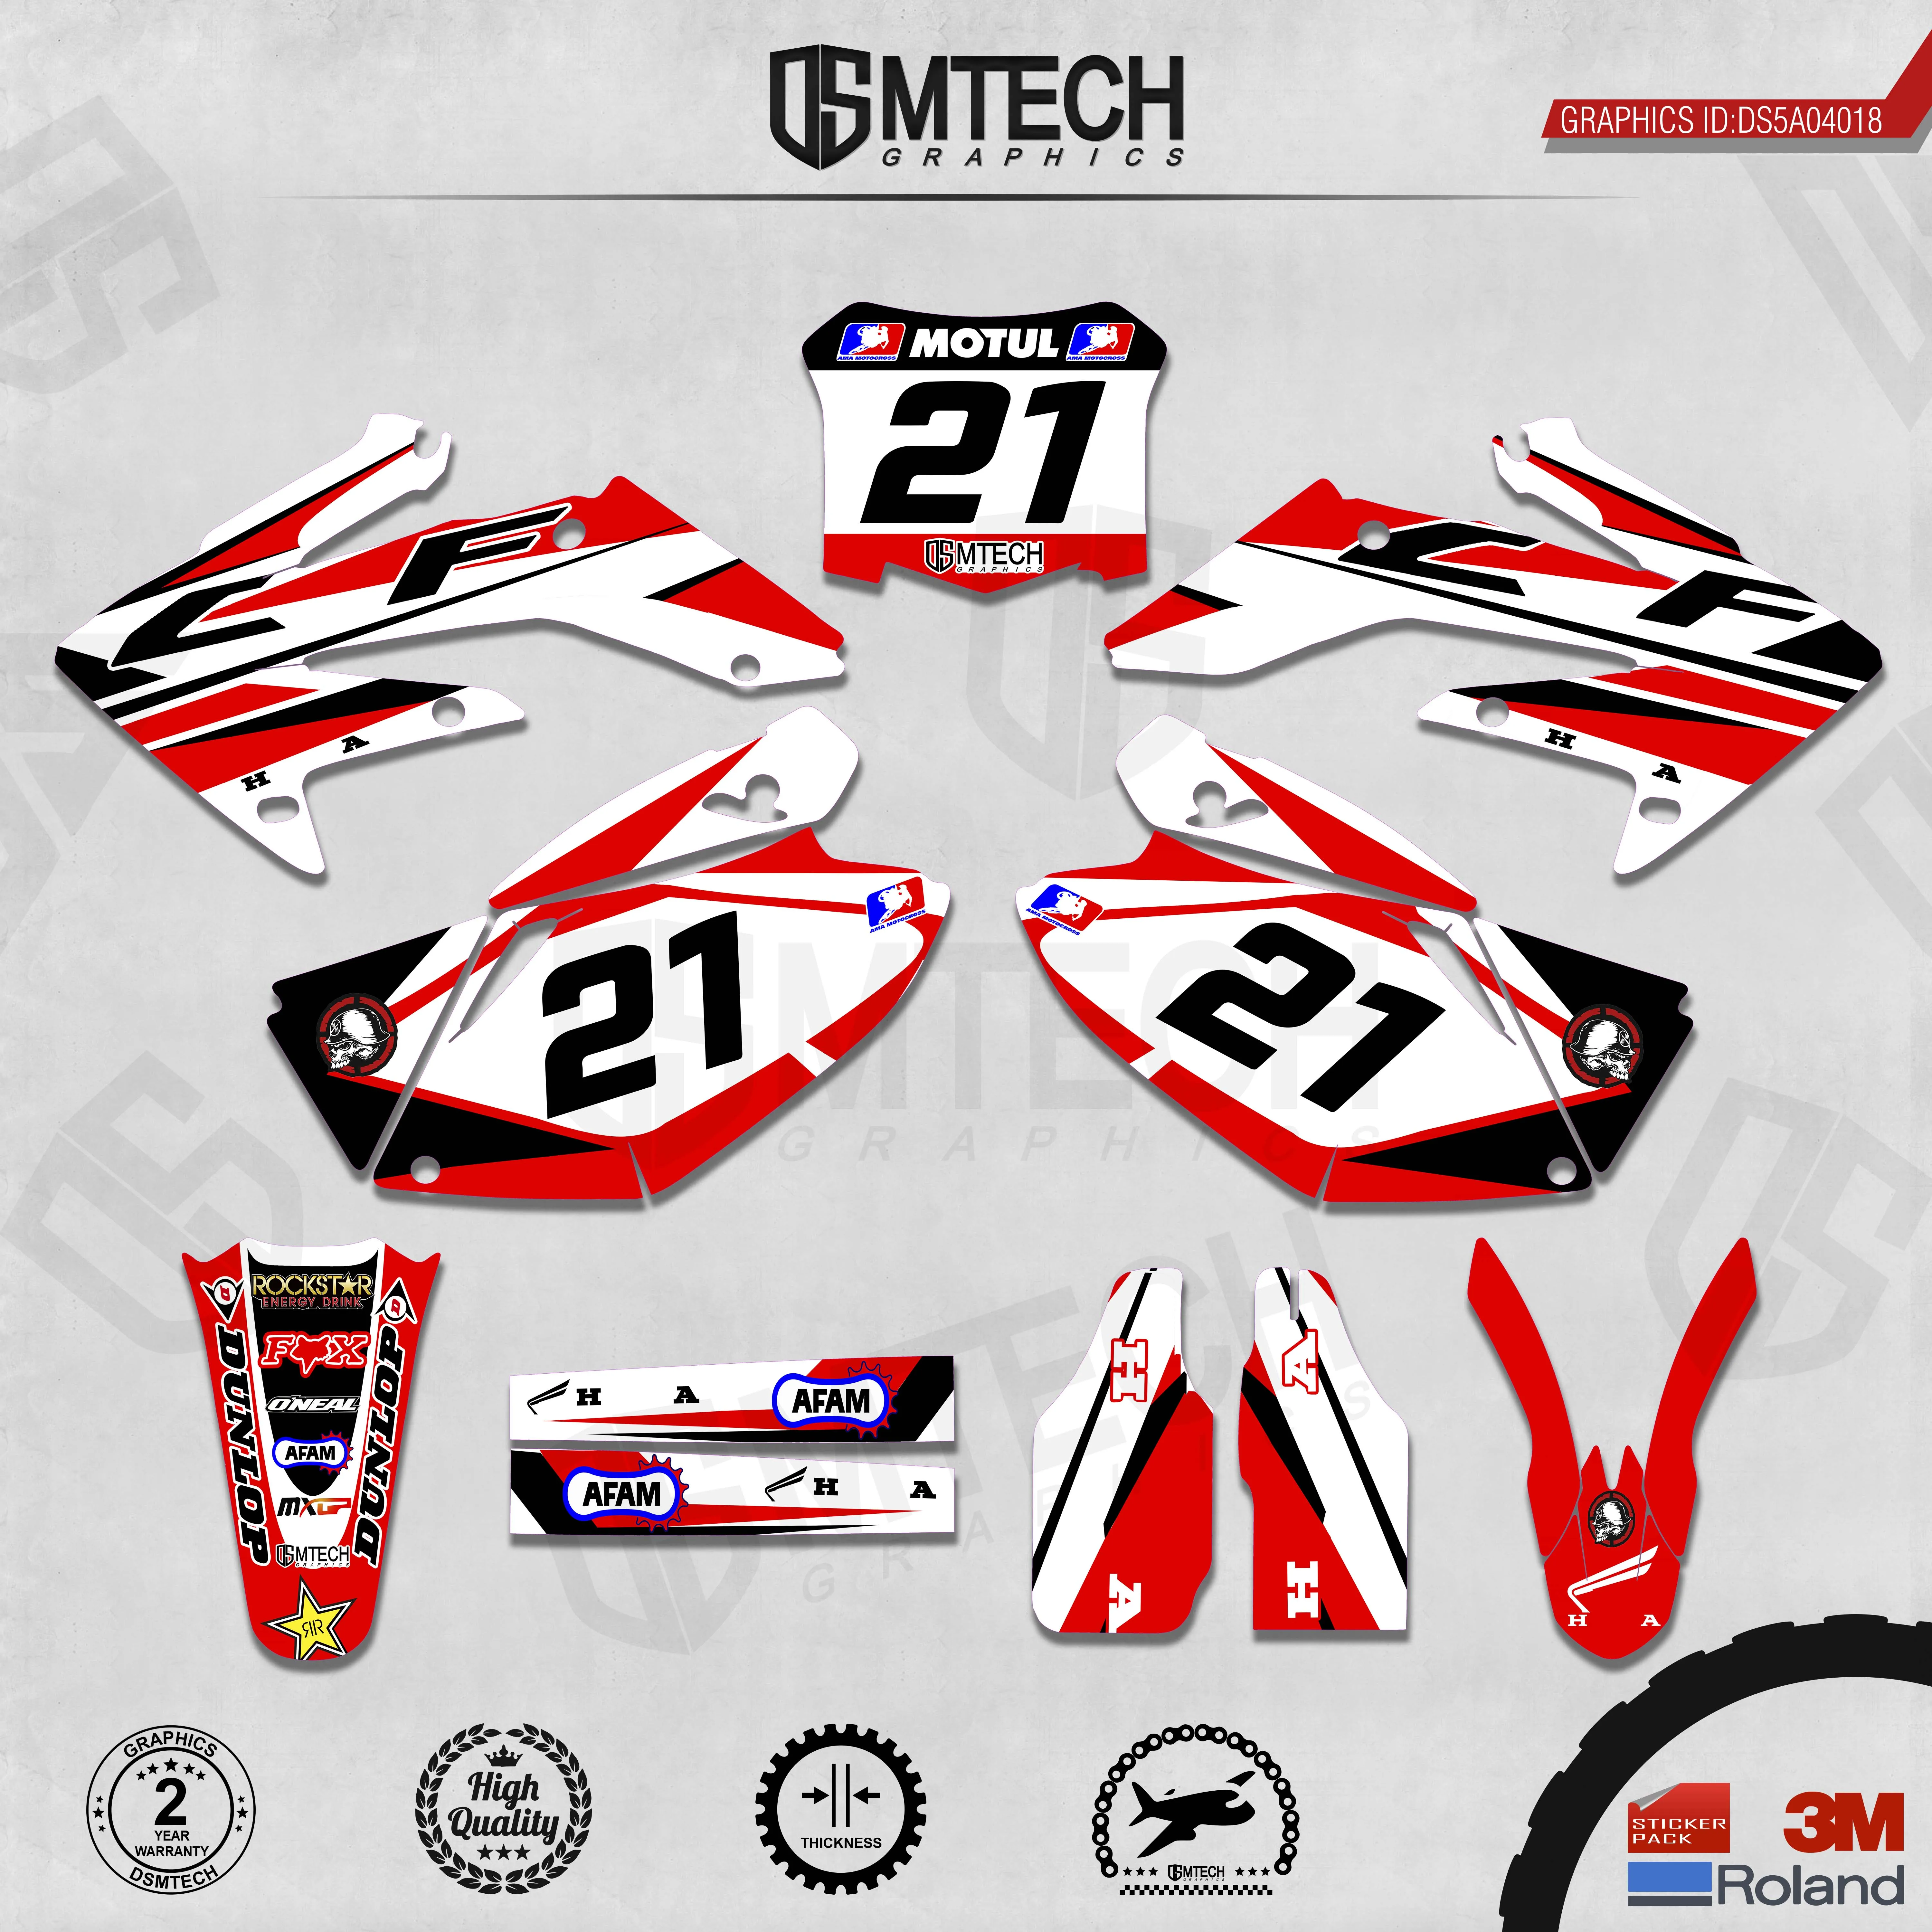 DSMTECH Customized Team Graphics Backgrounds Decals 3M Custom Stickers For 2004-2005 2006-2007 2008-2009 CRF250R 018